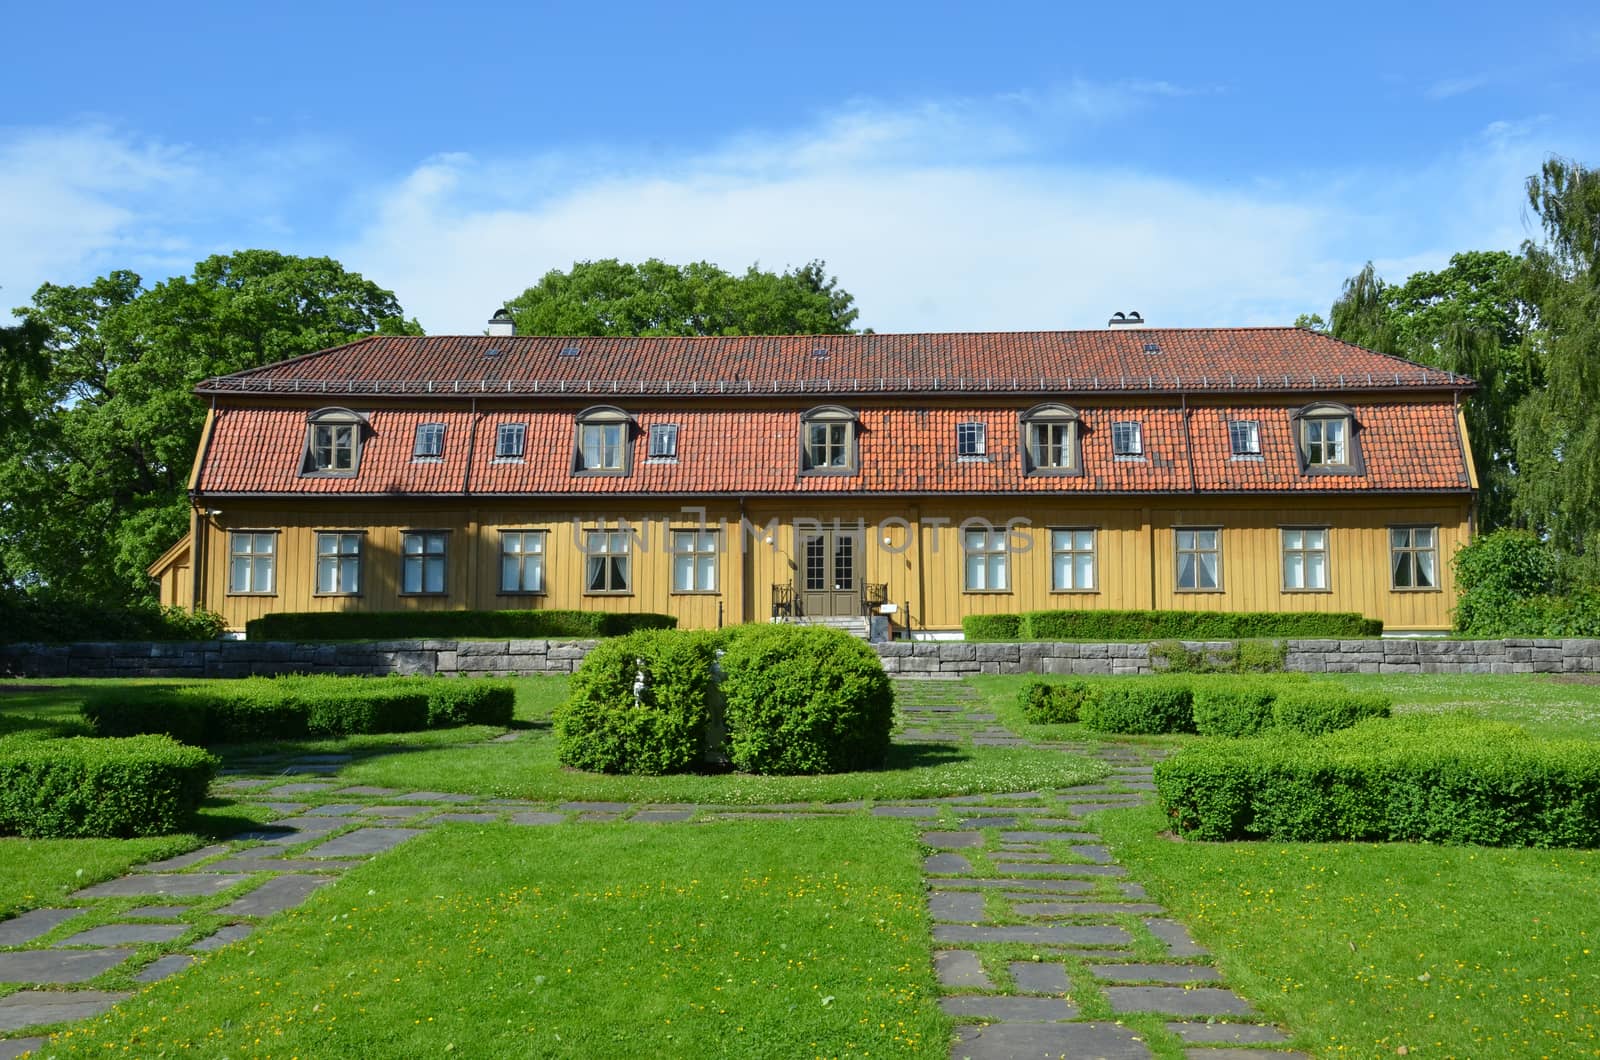 Tøyen Manor (Norwegian: Tøyen Hovedgård) is located in The University Botanical Garden at Tøyen in Oslo. Tøyen Manor is the University of Oslo's oldest building, and was given as a gift in 1812. The main house was built in 1679 and is believed to be Oslo’s oldest timber building.